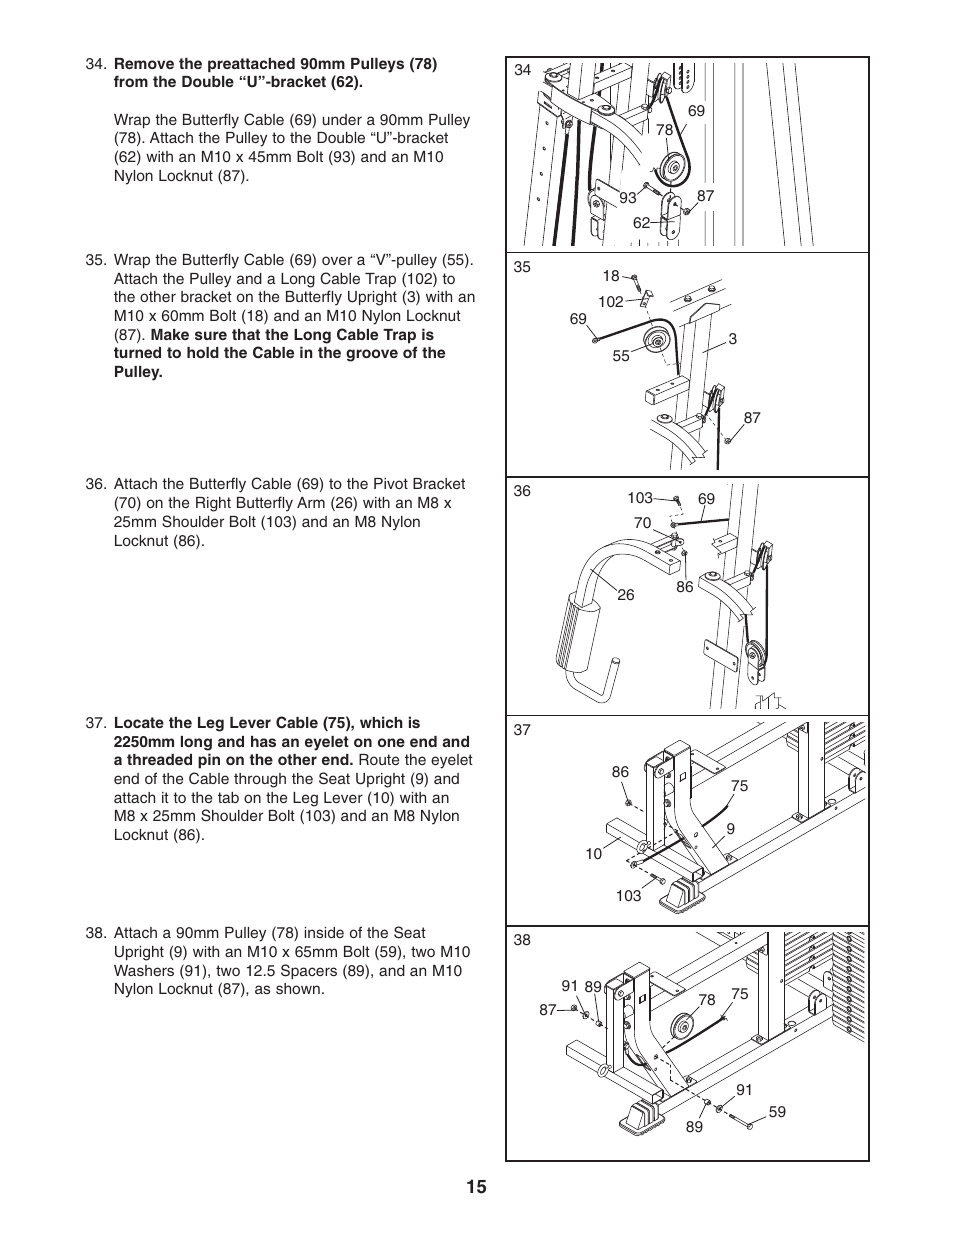 Weider Pro 4850 831.153932 User Manual | Page 15 / 33